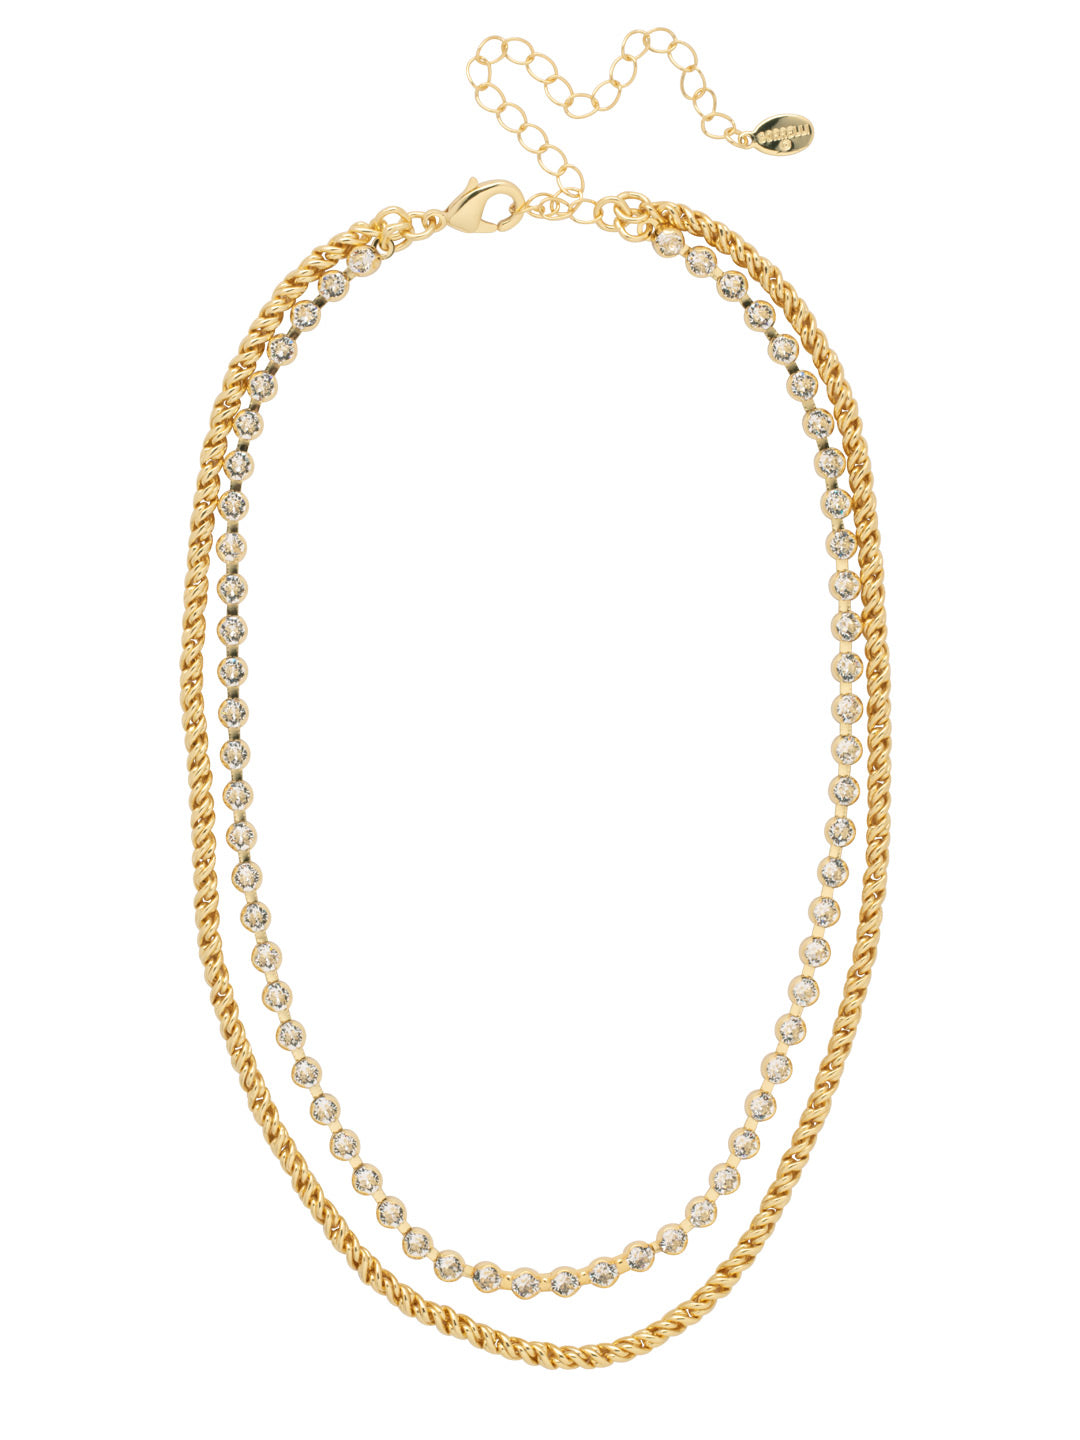 Crystal and Rope Chain Layered Necklace - 4NFJ16BGCRY